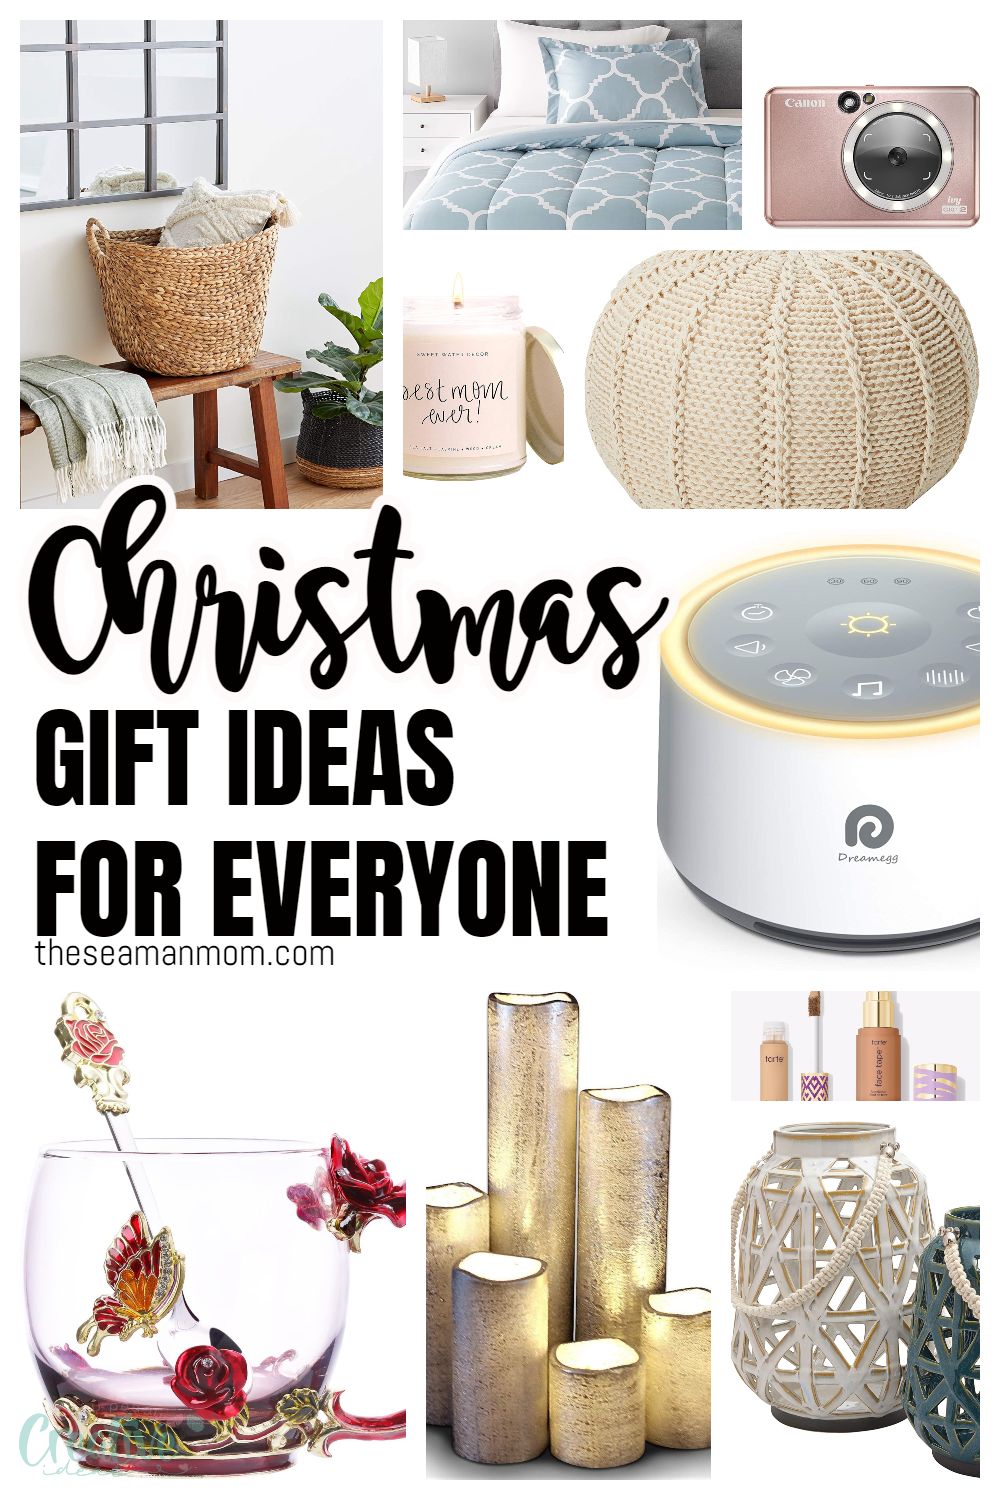 Christmas is just around the corner and I’ve got the ultimate Christmas gift guide! Find the perfect gift for your family and friends. Check out our best Christmas gift ideas here! via @petroneagu